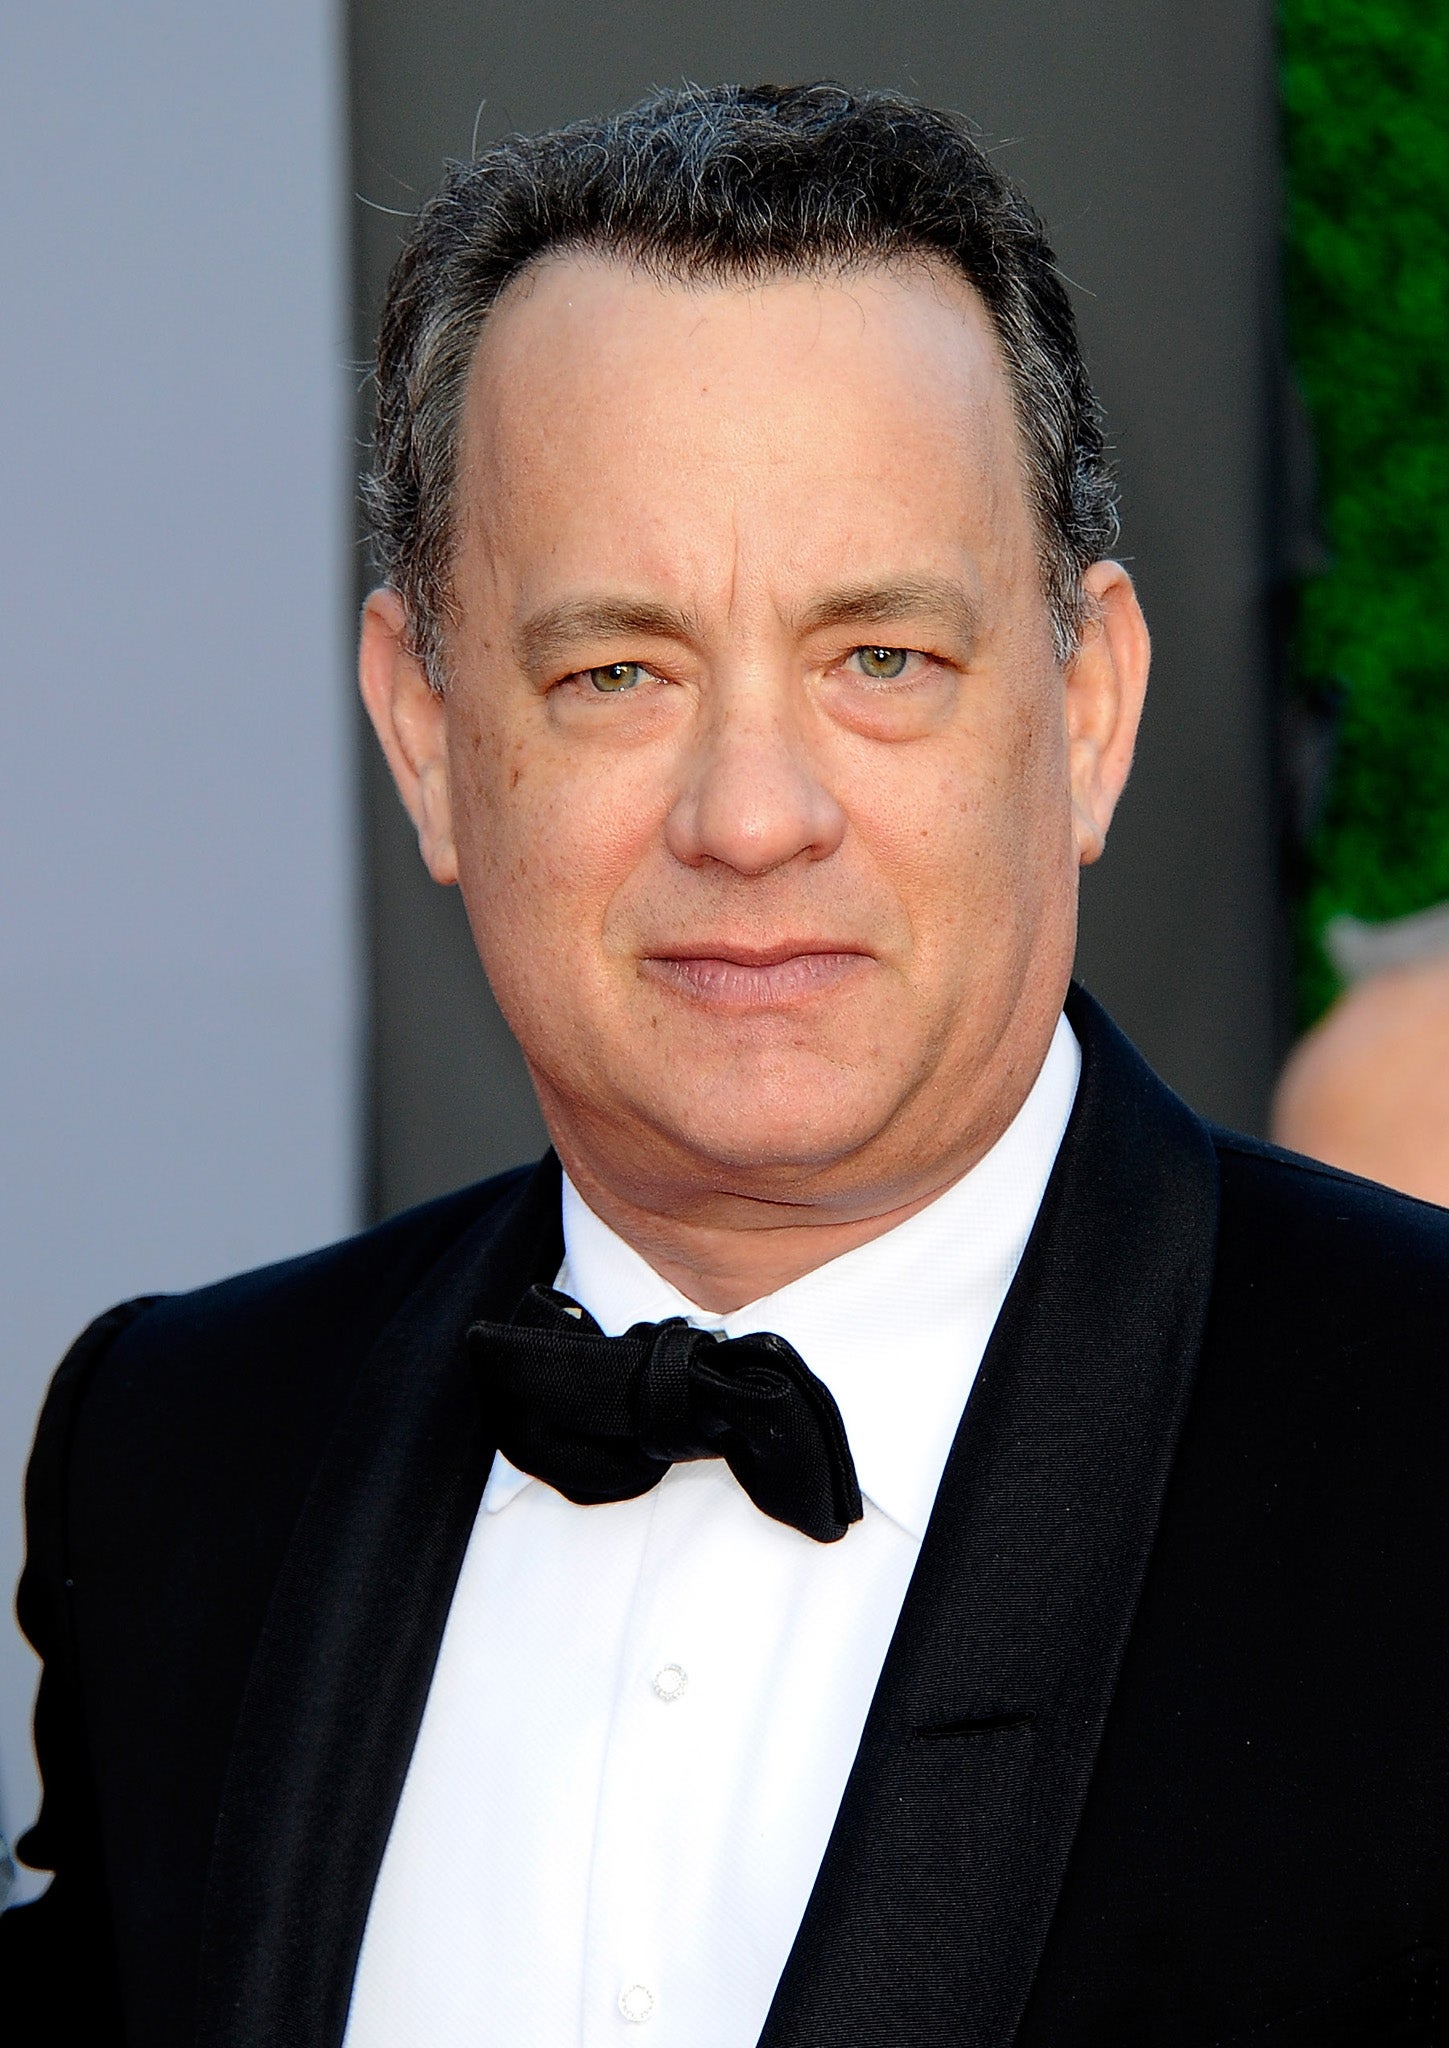 Tom Hanks Reveals He Has Type 2 Diabetes The Independent The Independent